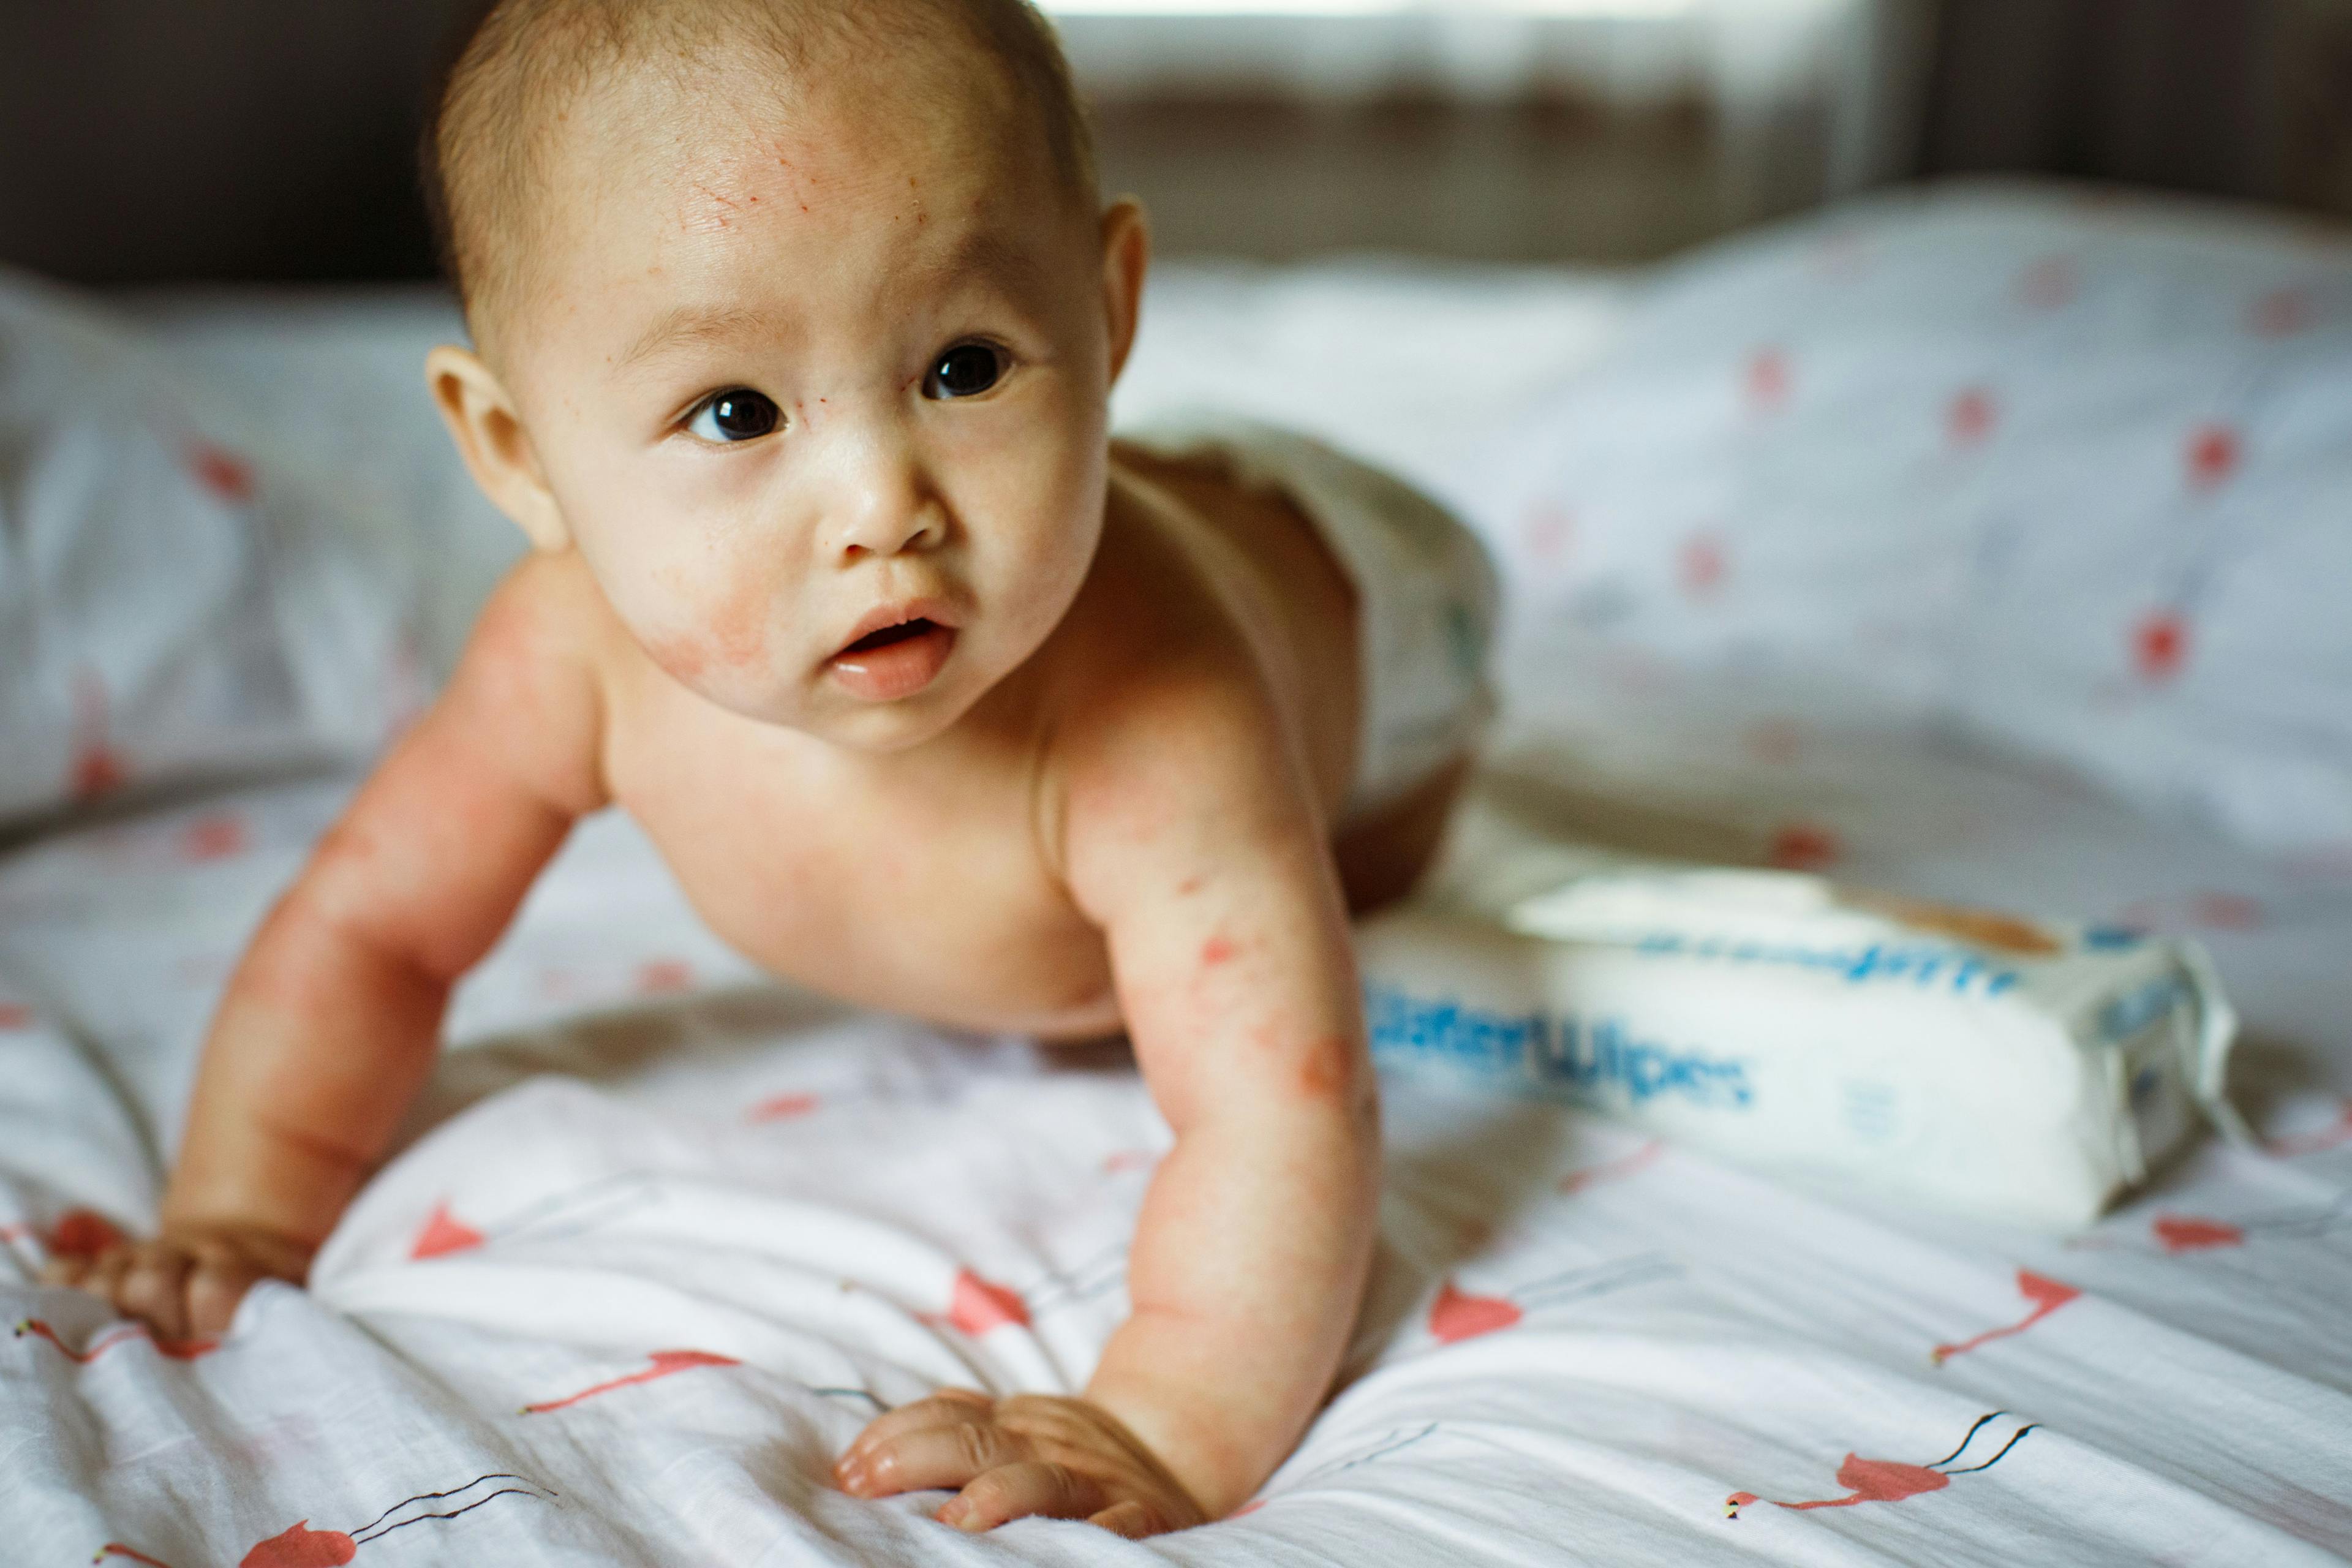 Atopic Dermatitis Prevention: Evidence-Based Infant Skin Care for the Primary Care Office